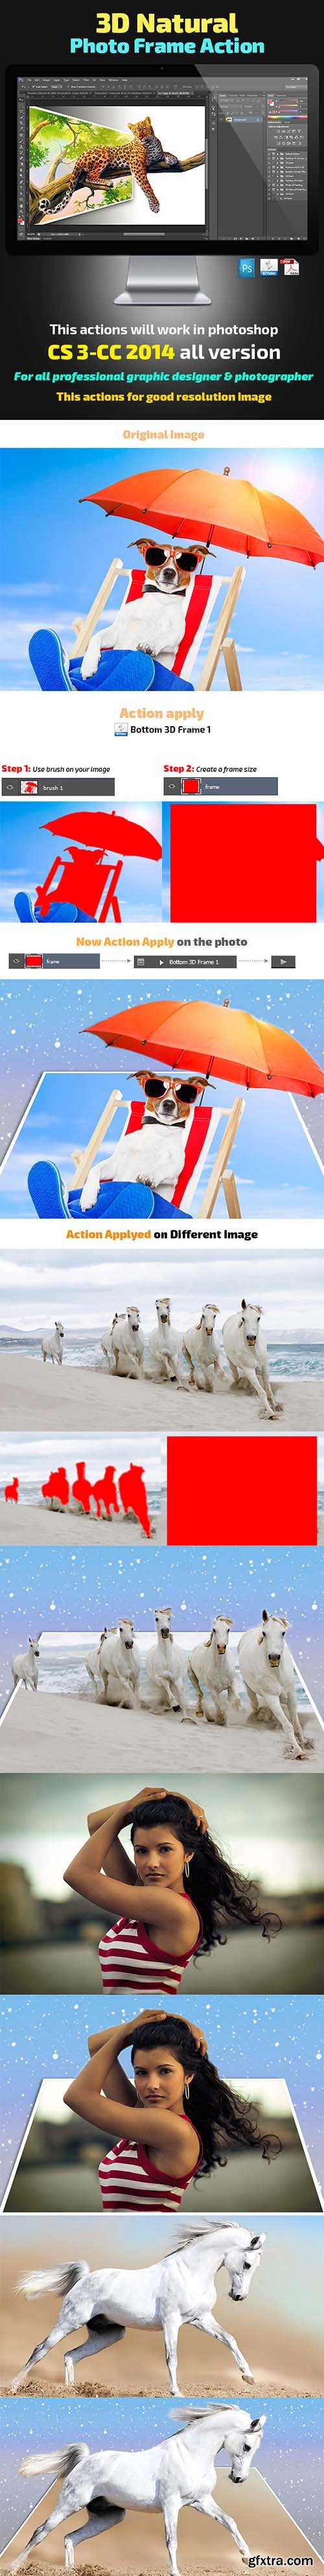 GraphicRiver 3D Natural Photo Frame Action 10431722